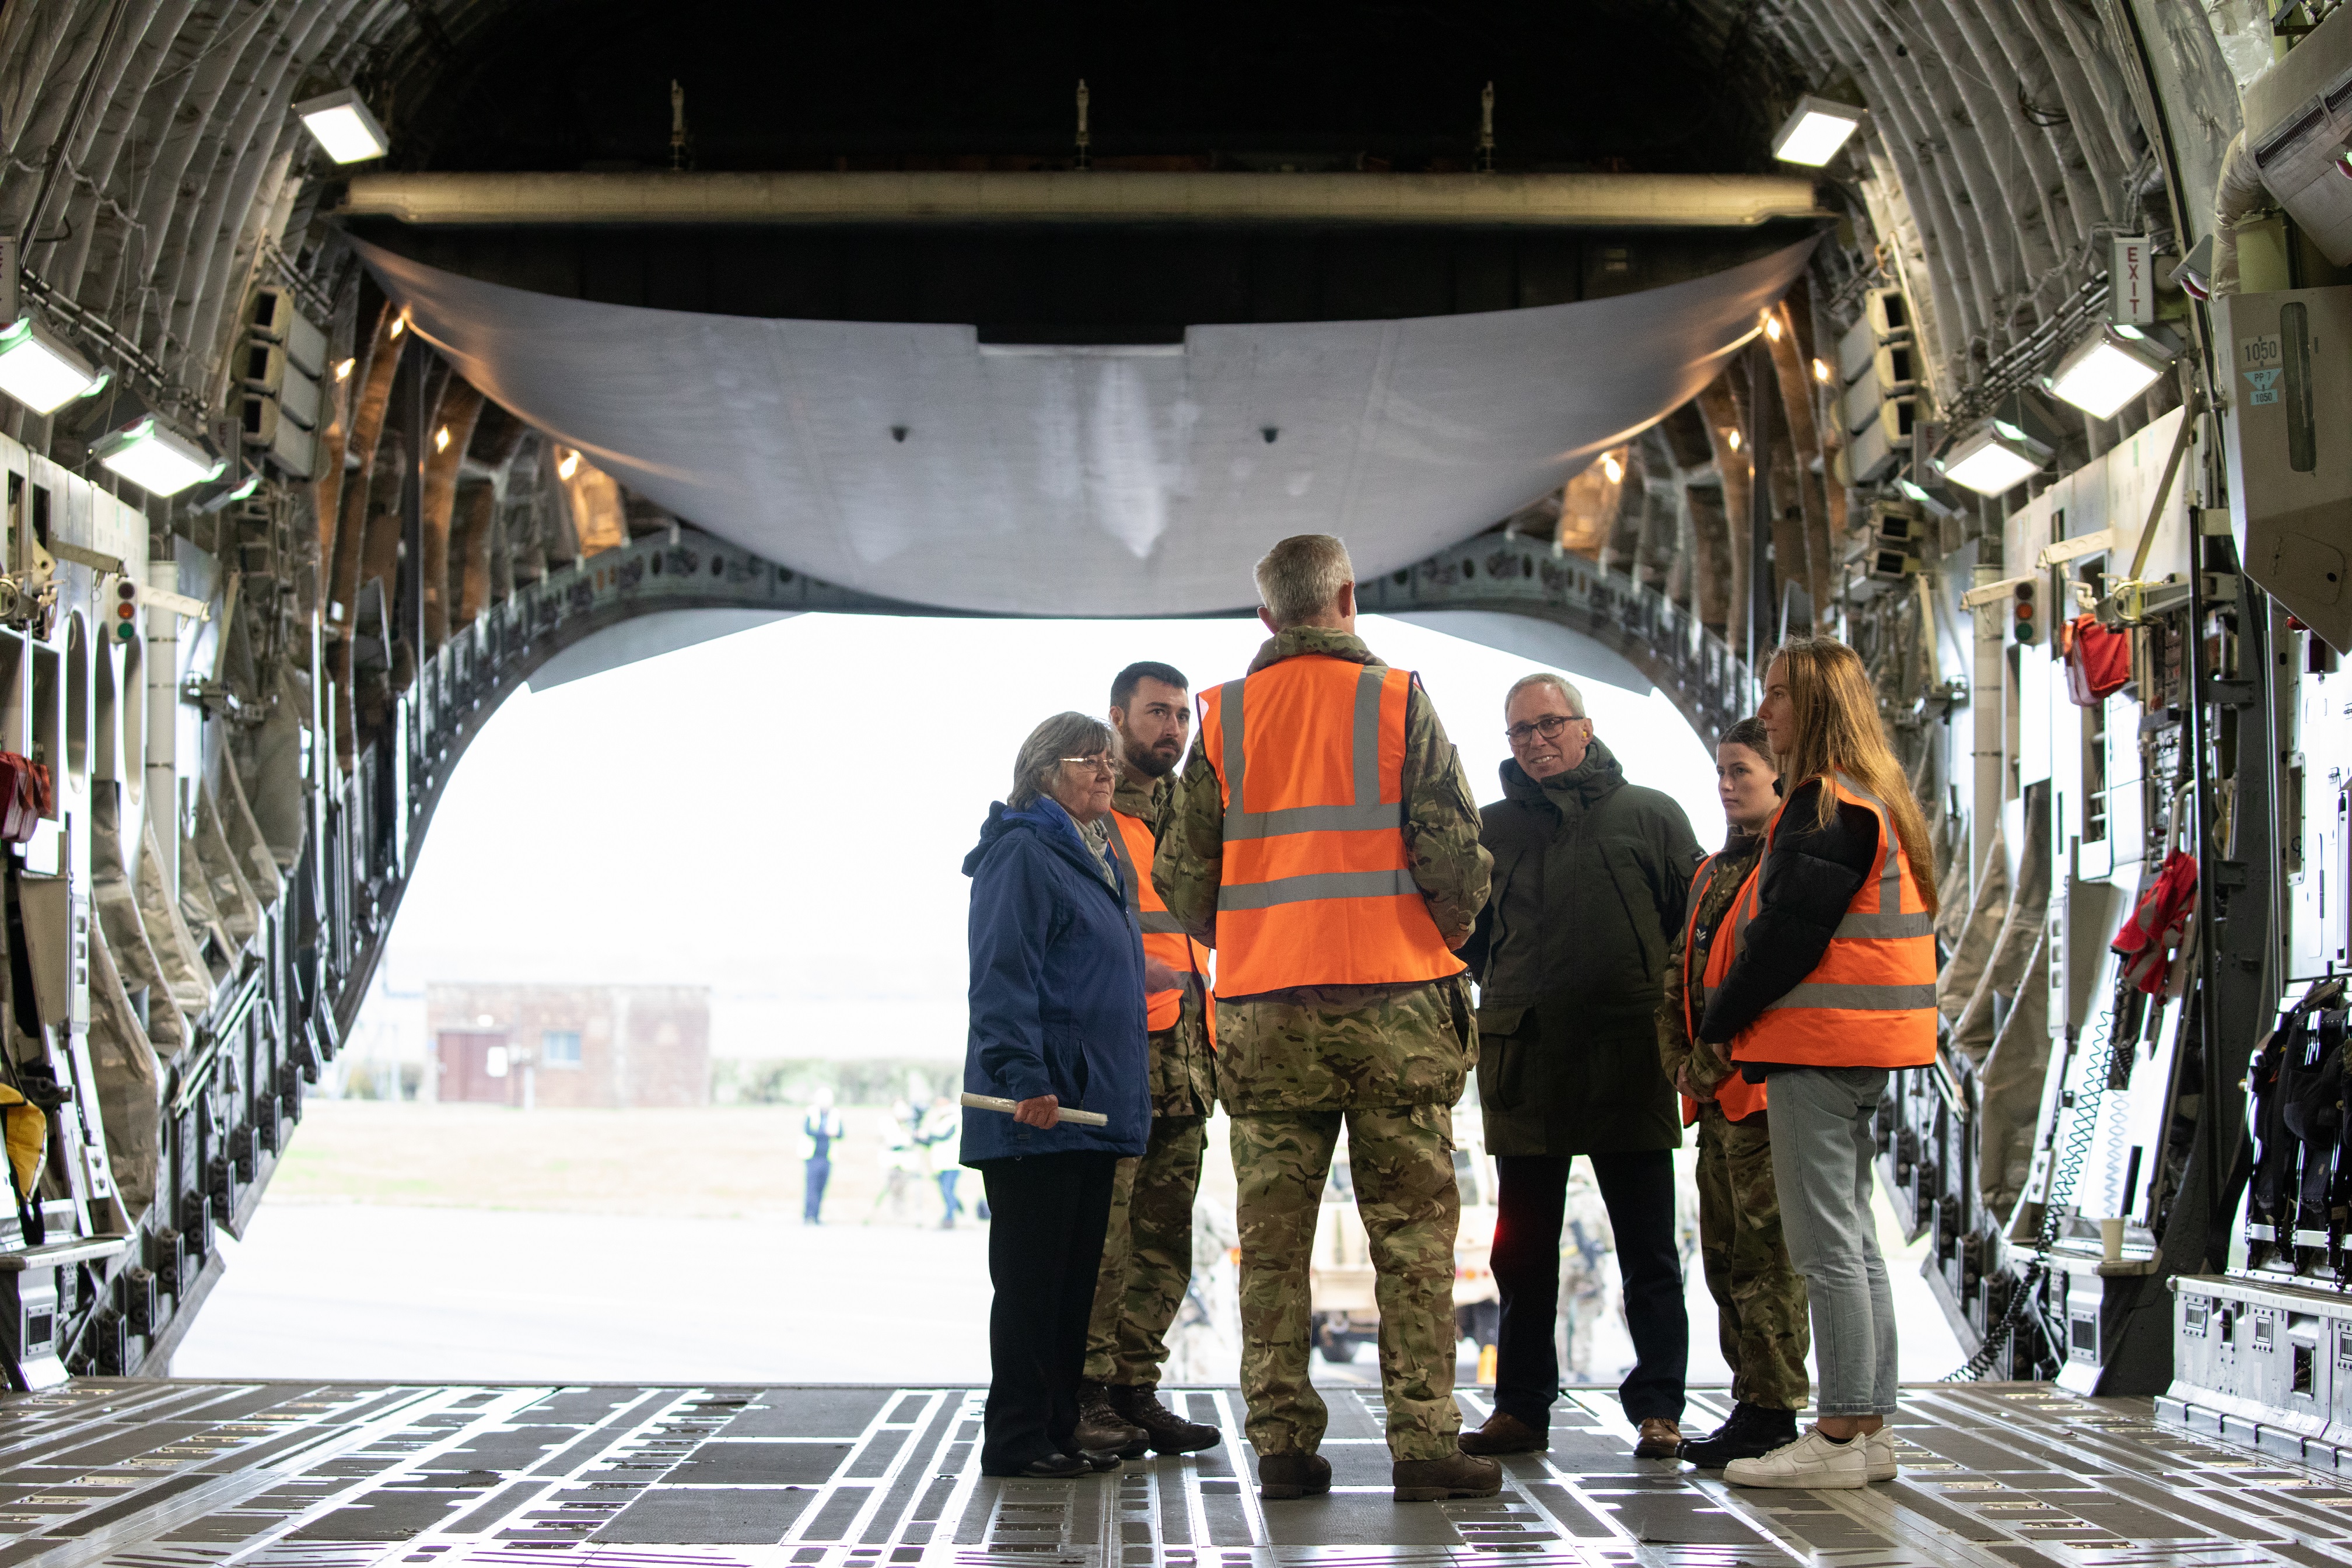 The Mayor (Cllr Mrs Gloria Johnson) and Deputy Mayor (Cllr David Taylor) of Stamford in the cargo area of an RAF C-17 during a visit to RAF Wittering yesterday